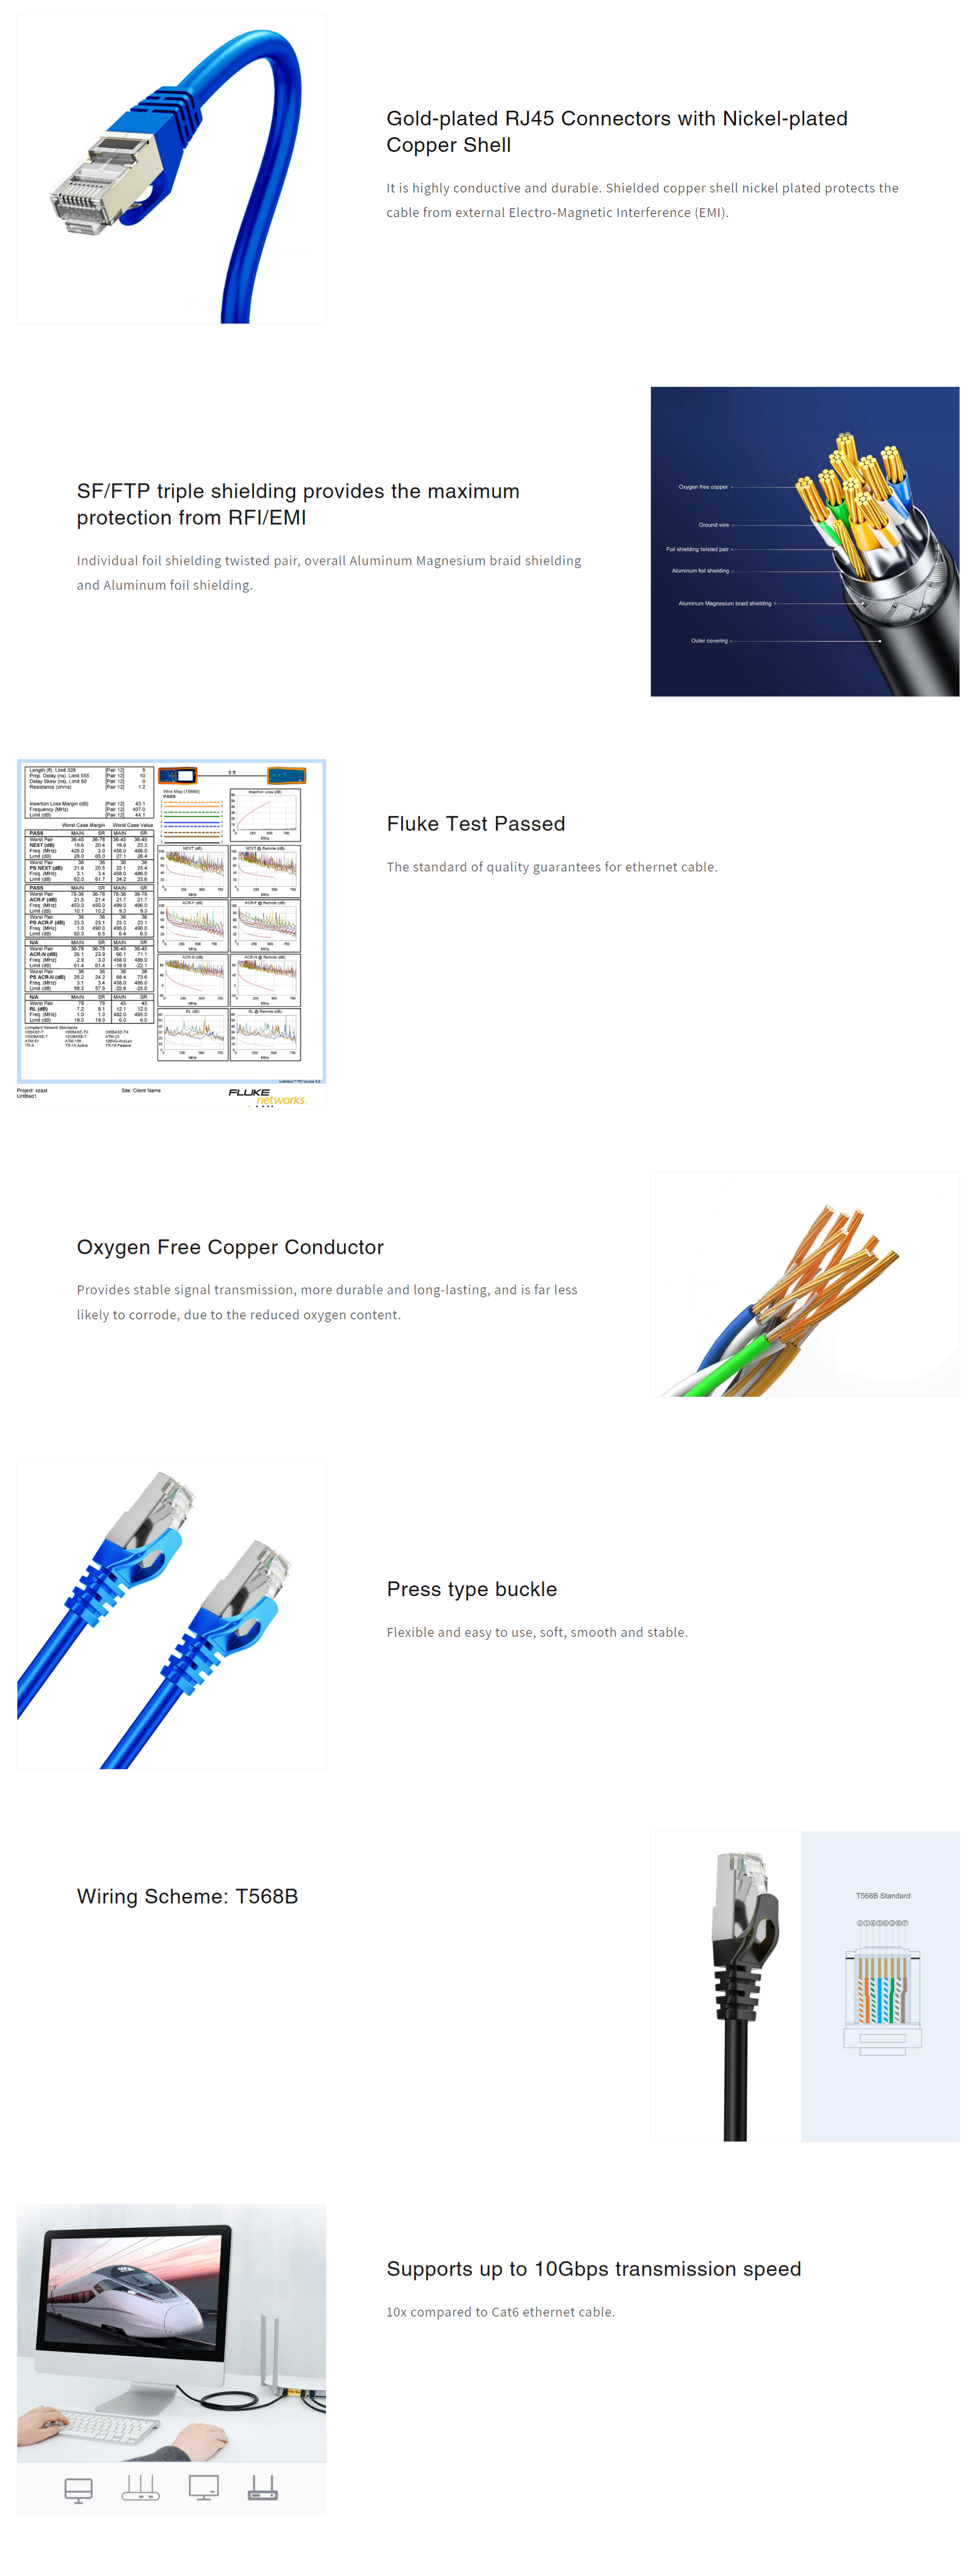 A large marketing image providing additional information about the product Cruxtec Cat7 2m 10GbE SF/FTP Triple Shielding Network Cable Blue - Additional alt info not provided